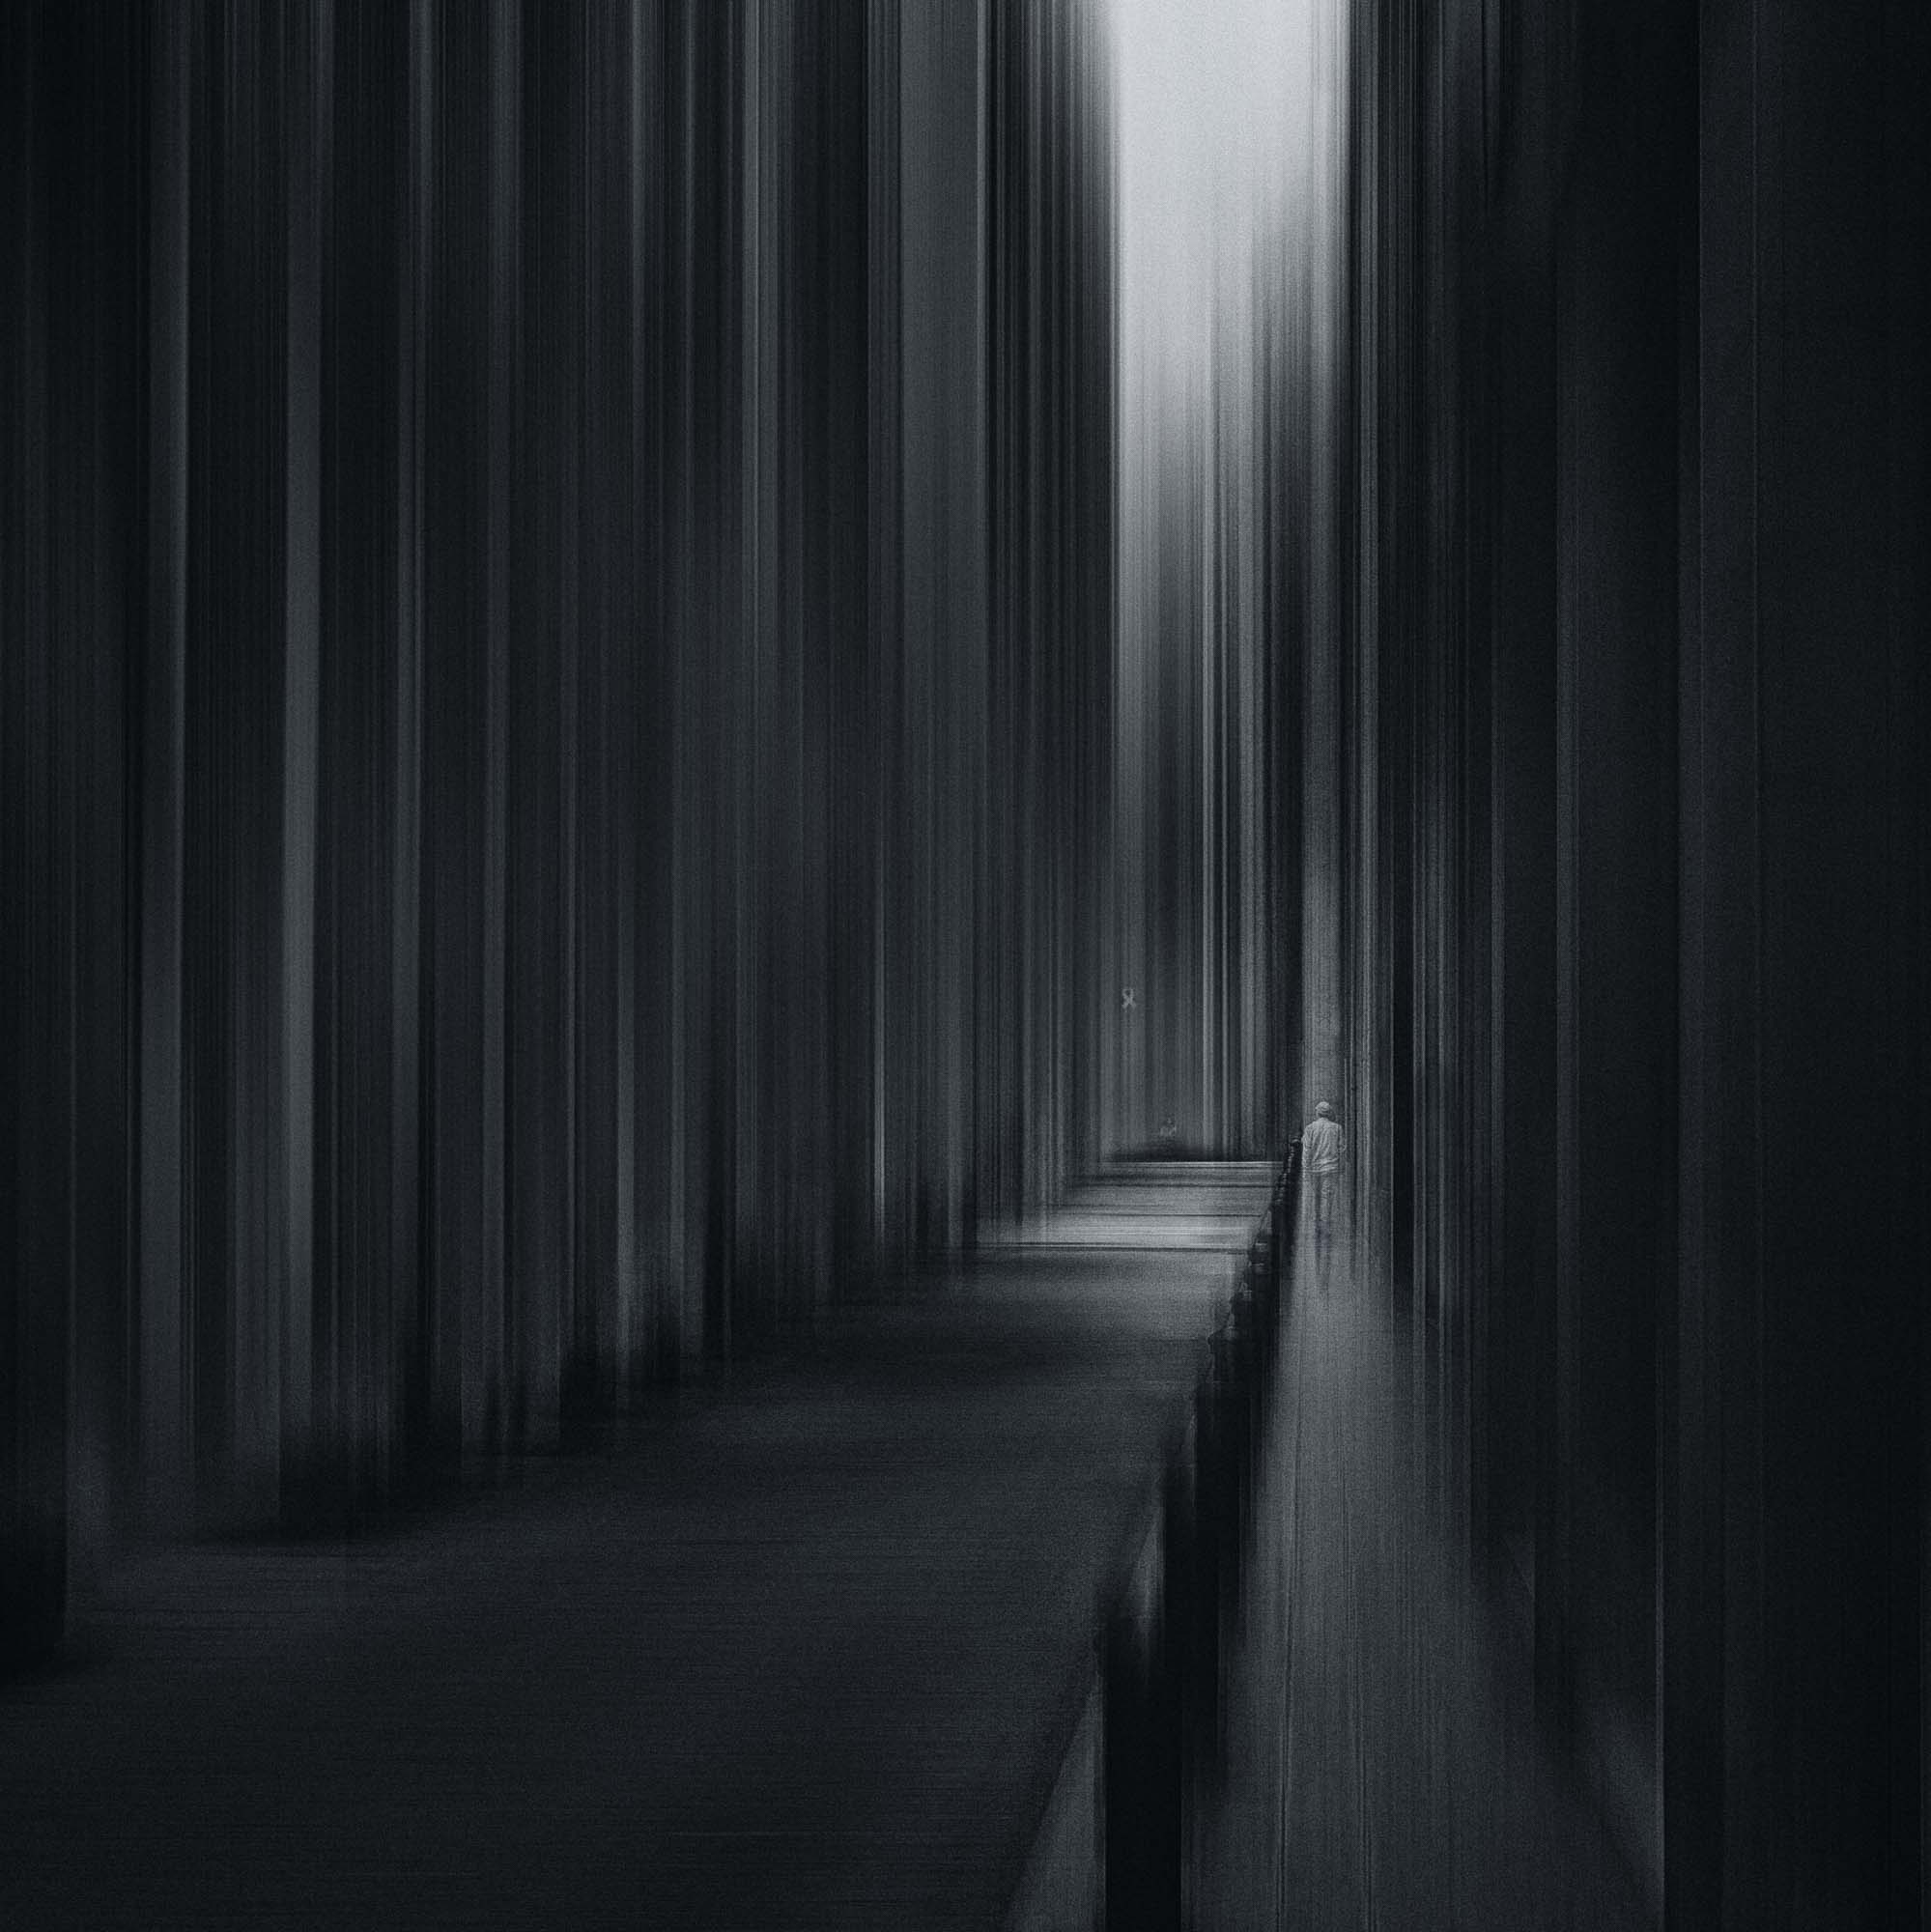 "Black and white artistic photograph showing a blurred figure walking along a path lined with vertical streaks in Barcelona."